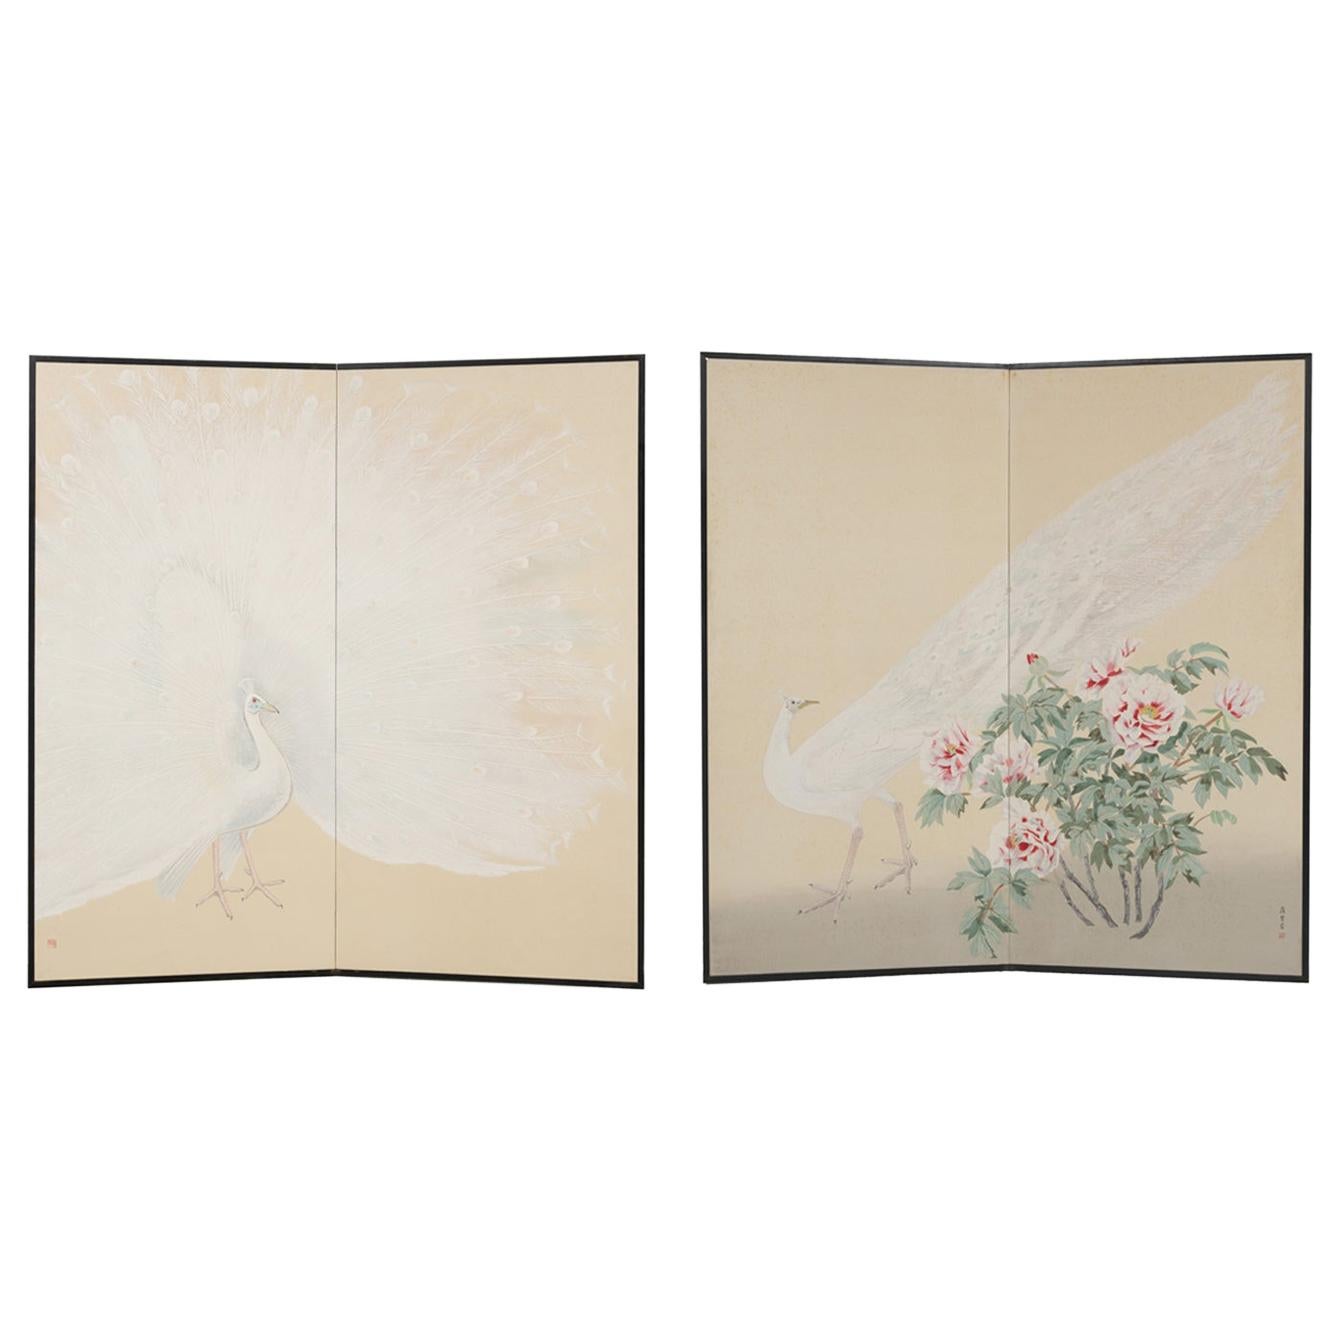 Pair of Fabulous Japanese White Peacock Two-Fold Folding Screen Room-Dividers